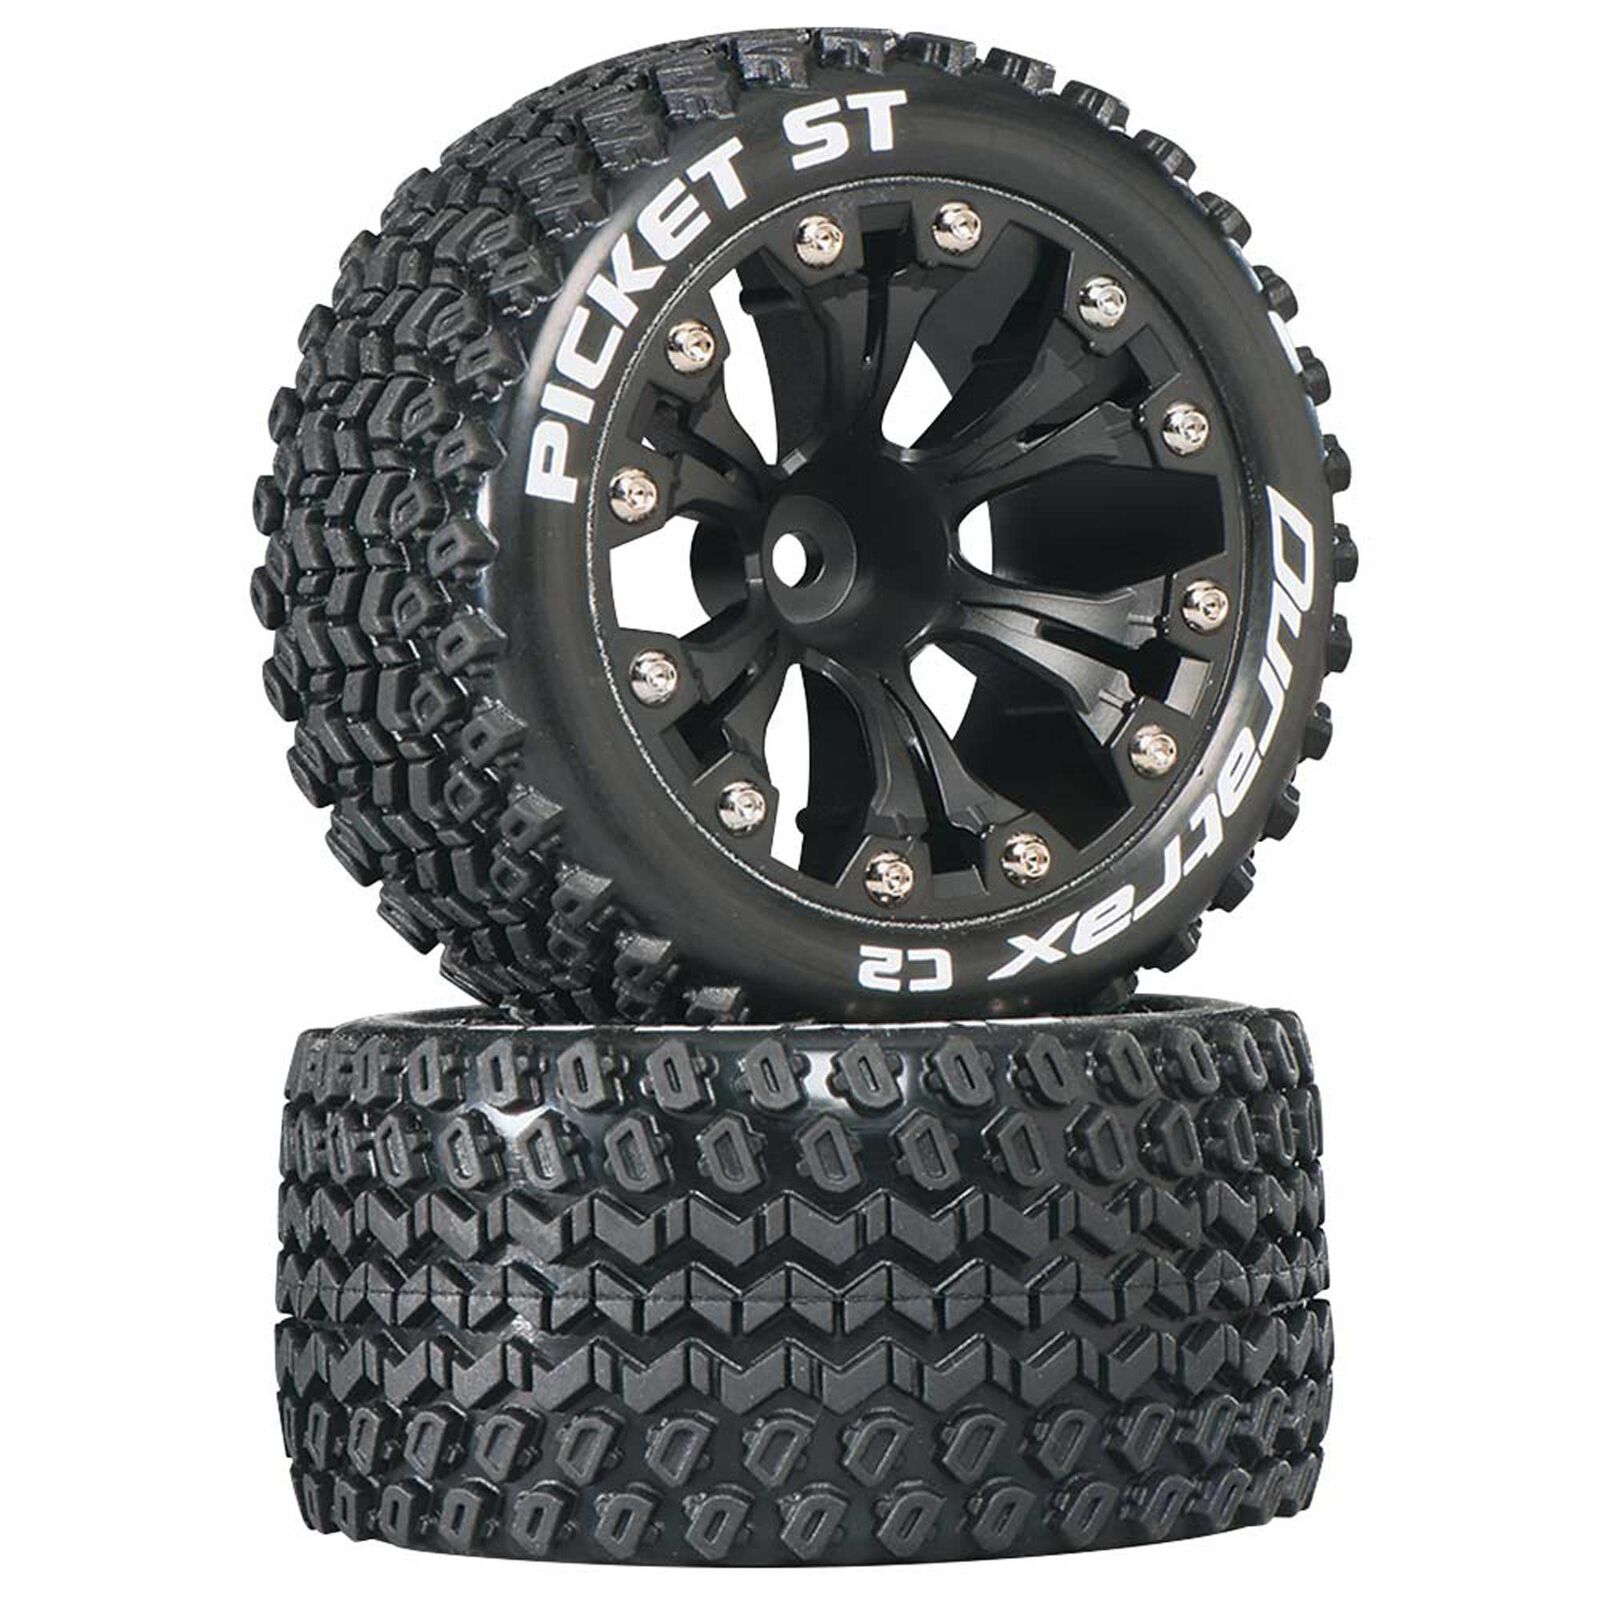 Picket ST 2.8" 2WD Mounted 1/2" Offset Tires, Black (2)